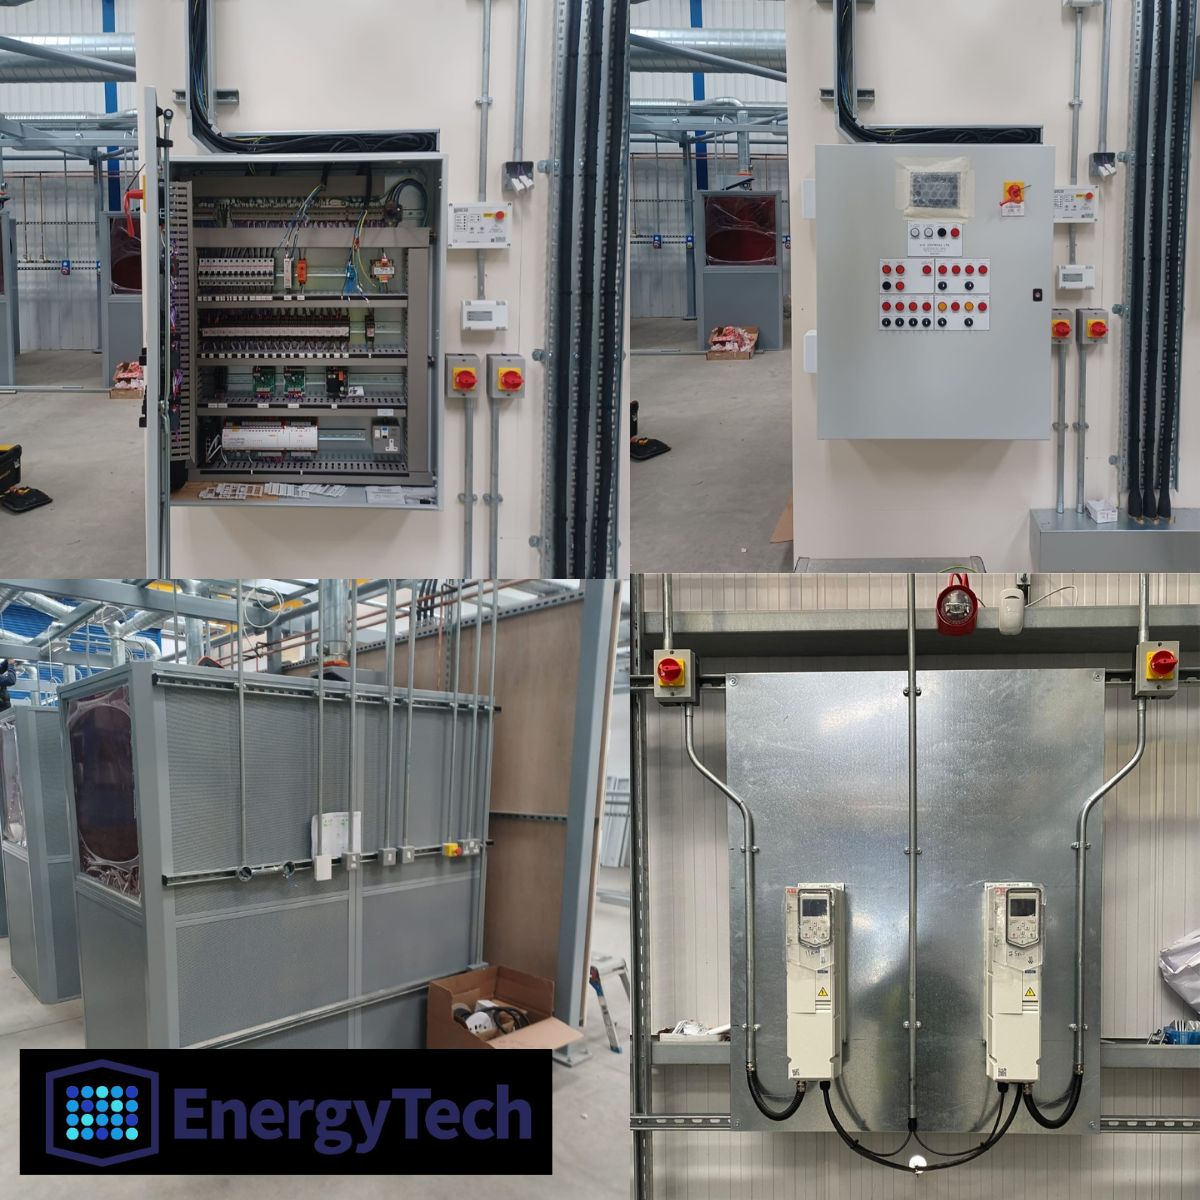 This is a recent BMS install which we're really proud of!

For more info about how we can help with your electrical engineering project, get in touch with the team👉
📞0191 250 9473
📧admin@energytech.ltd

#electricalengineering #electrician #northumberland